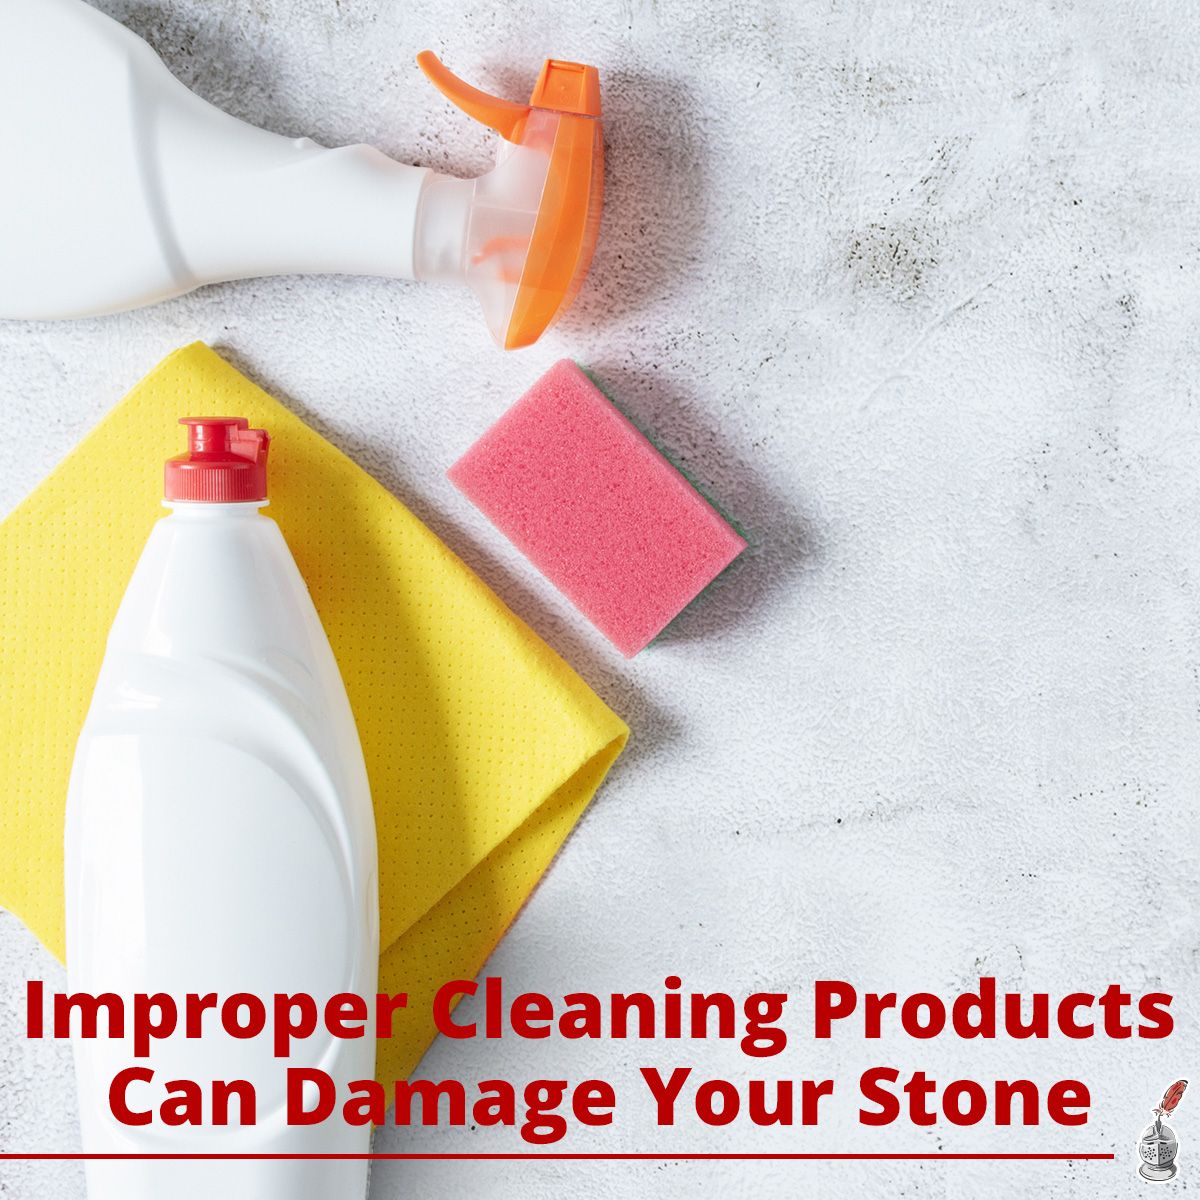 Improper Cleaning Products Can Damage Your Stone